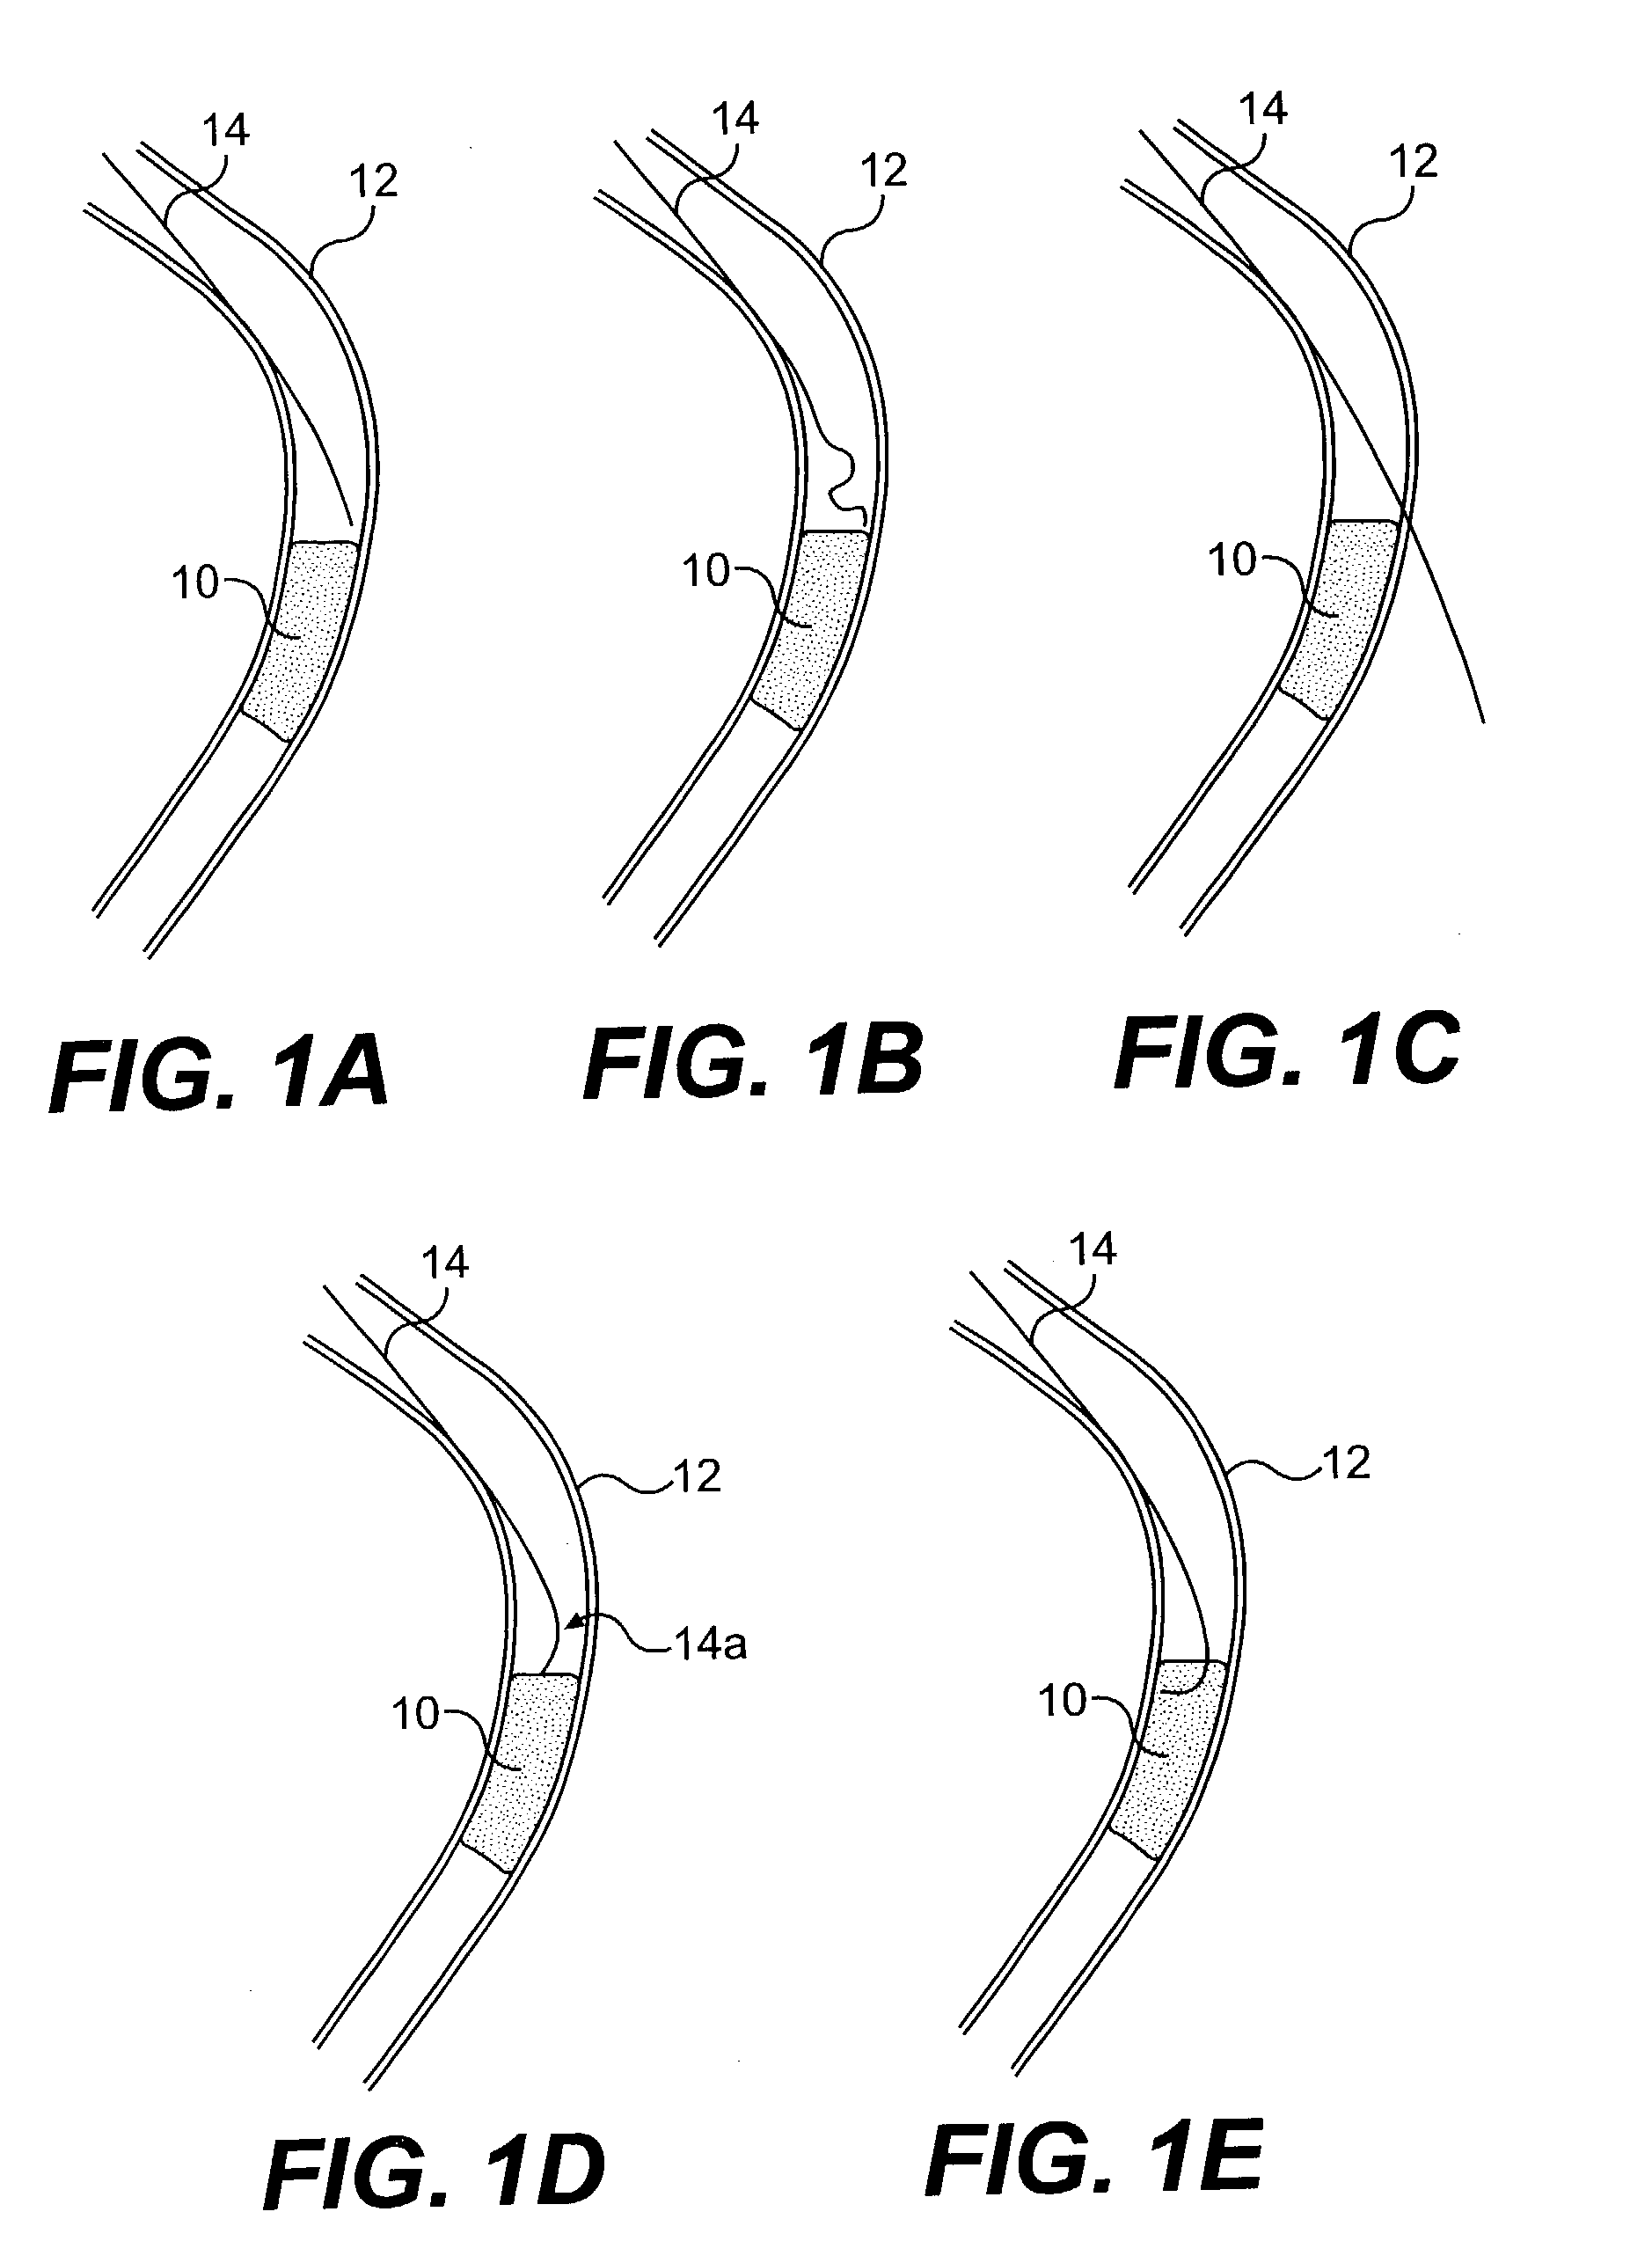 Guide wire control catheters for crossing occlusions and related methods of use